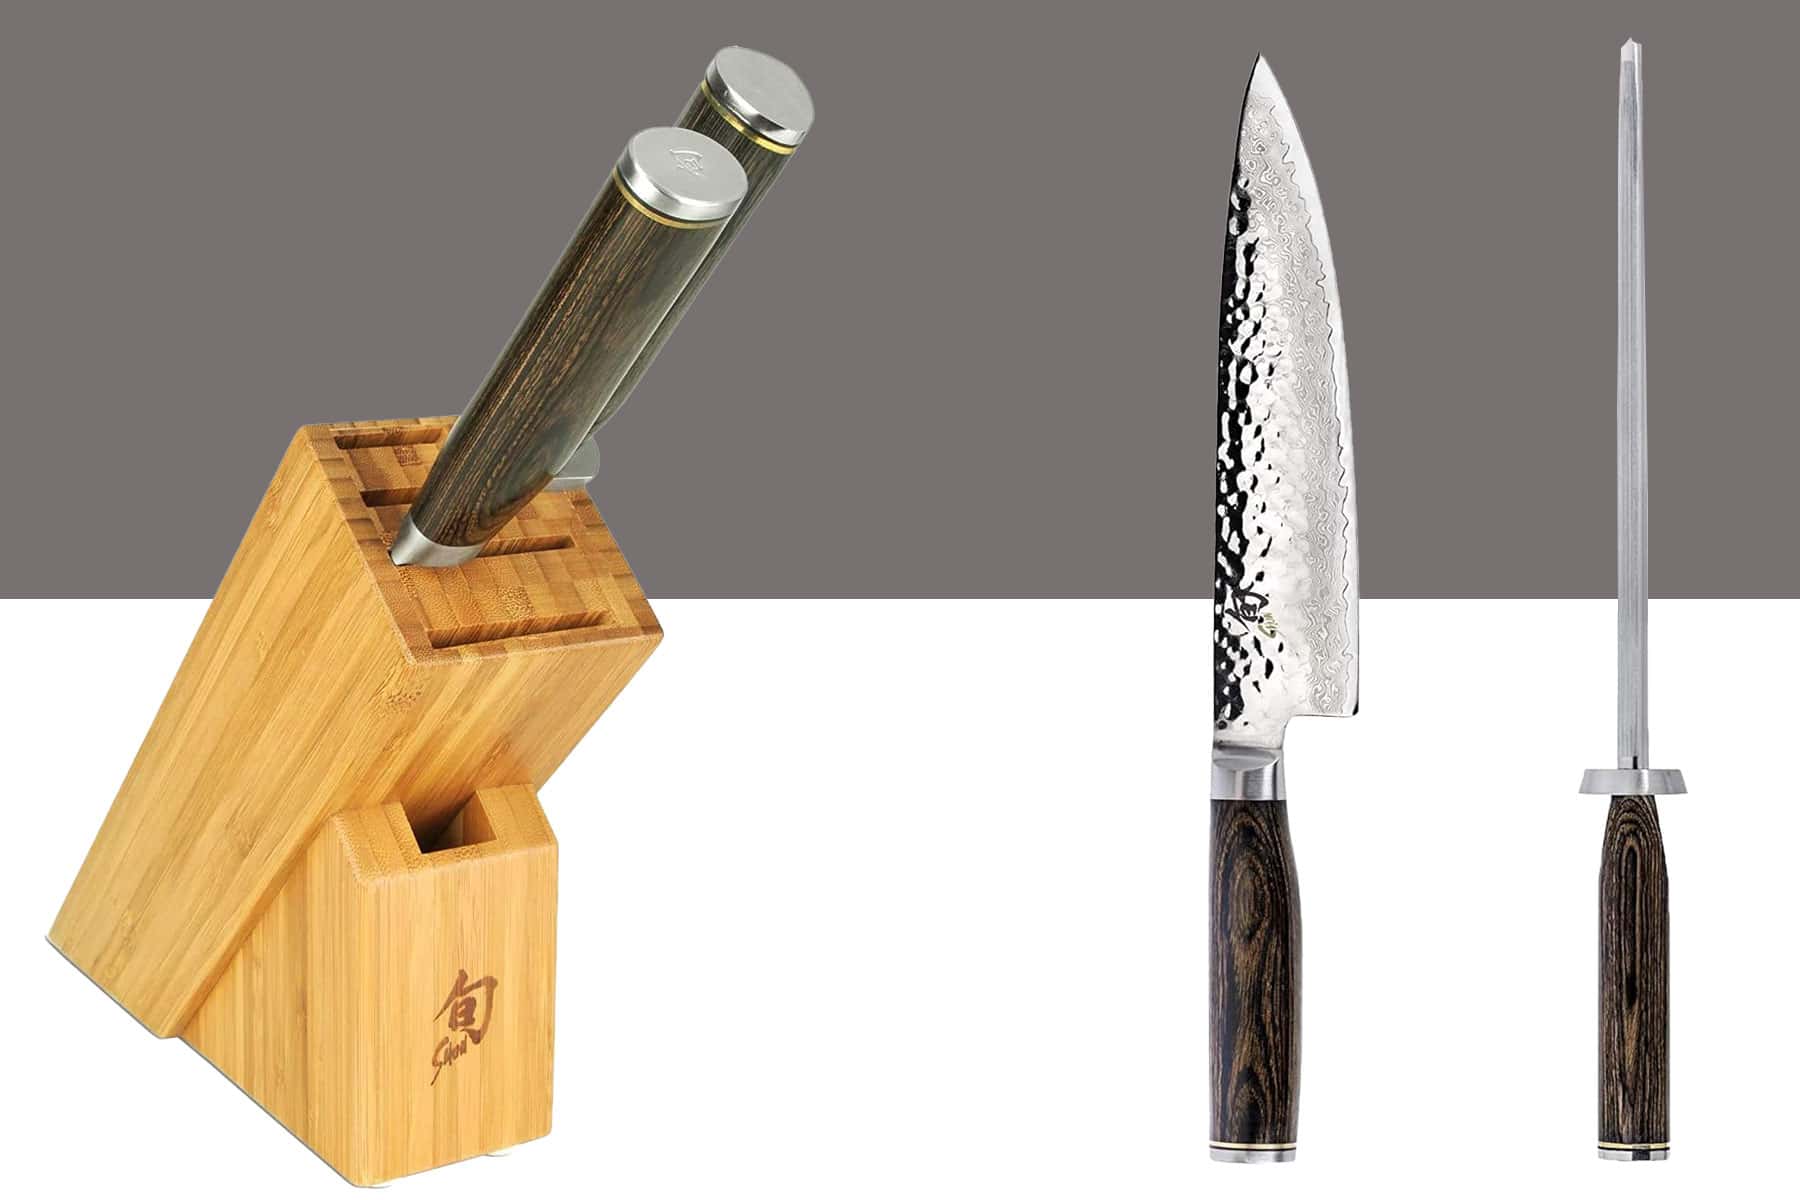 The Shun Premier Build-A-Block 3-piece knife set shown with the knives inside the storage block on the left and outside the storage block on the right.